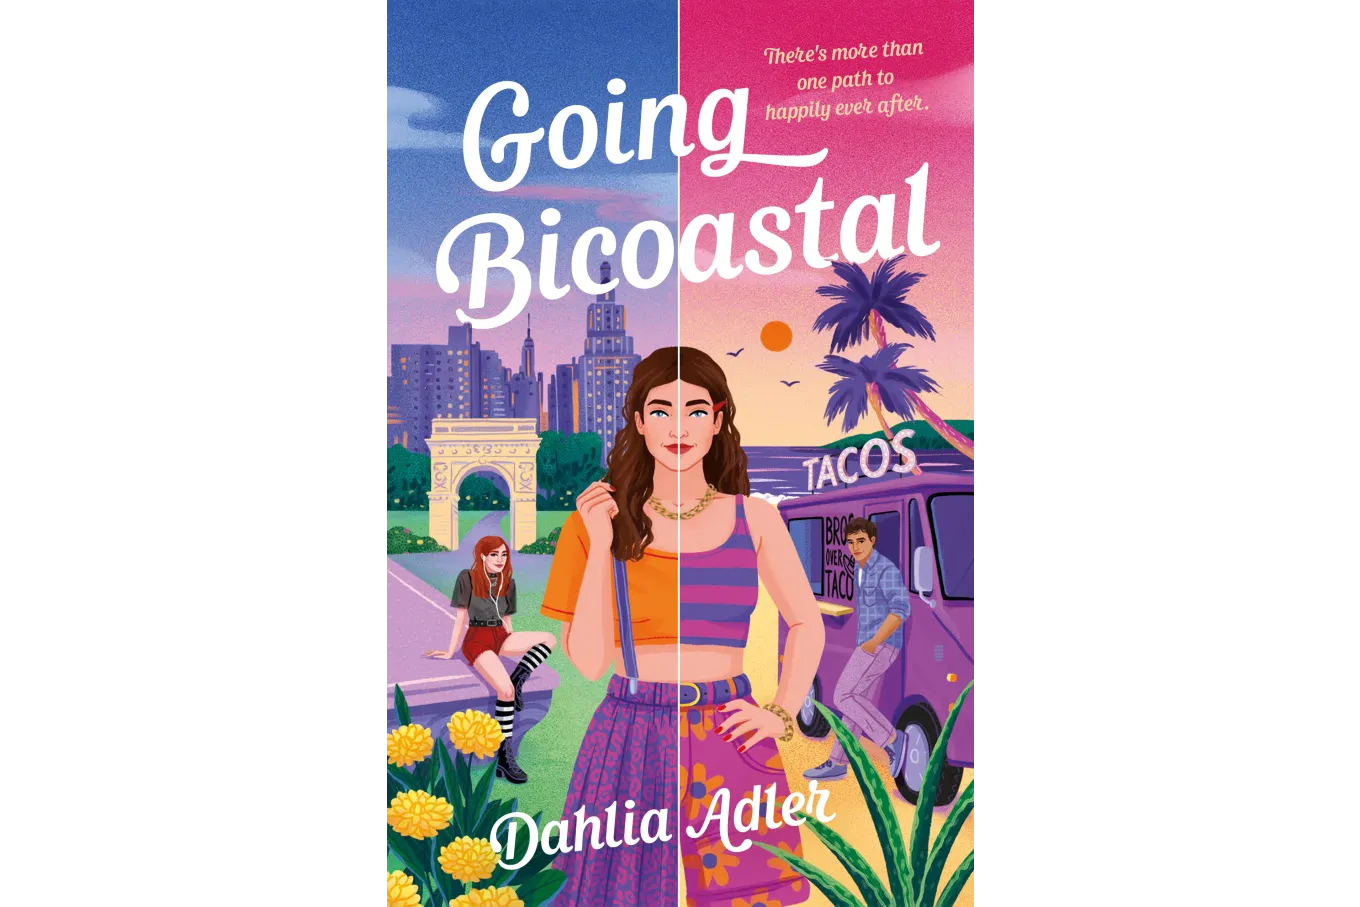 Cover of Going Bicoastal